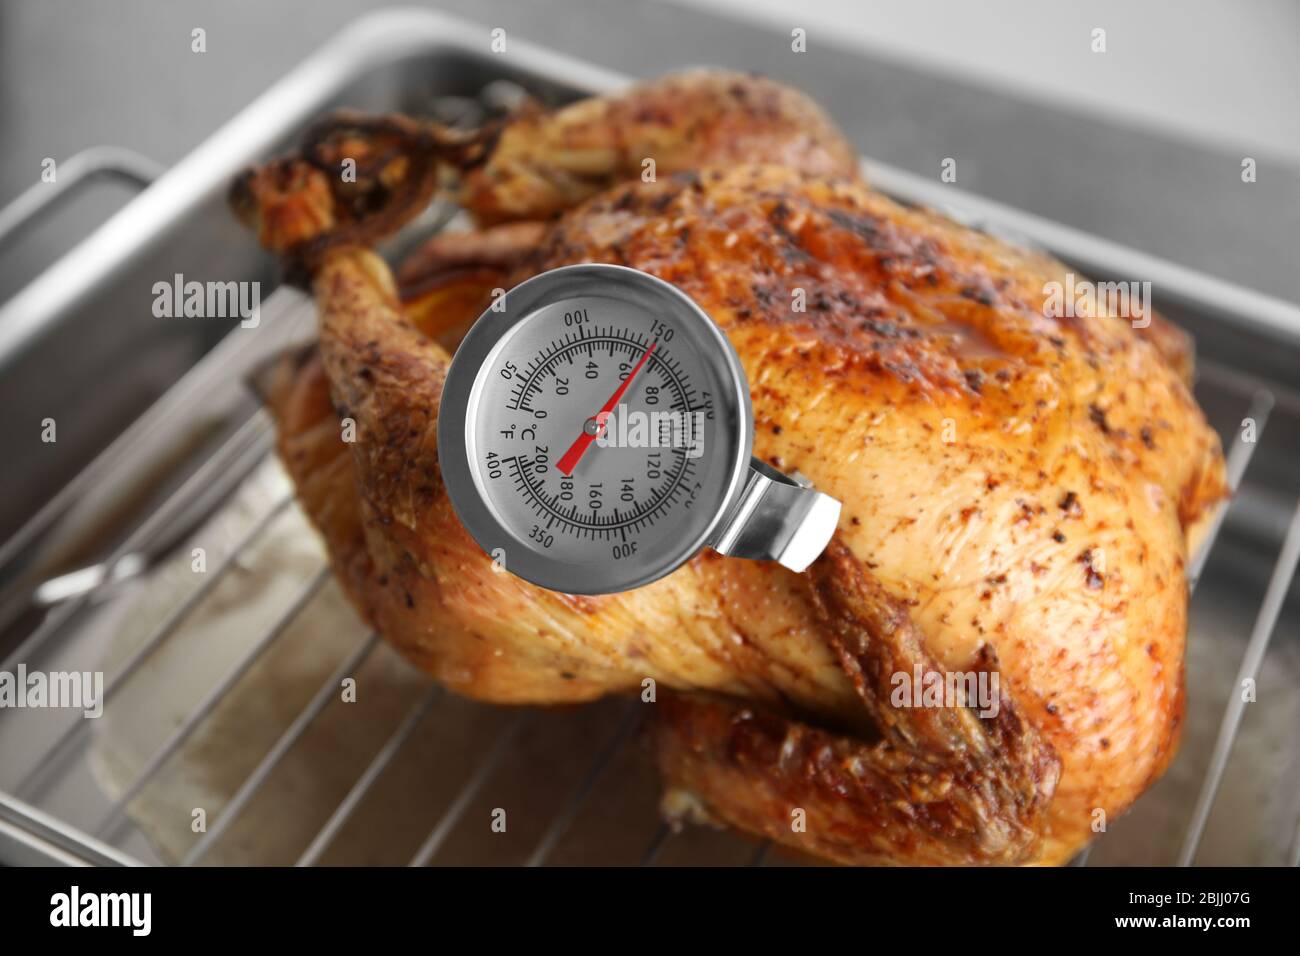 https://c8.alamy.com/comp/2BJJ07G/golden-roasted-turkey-on-baking-tray-with-a-meat-thermometer-2BJJ07G.jpg